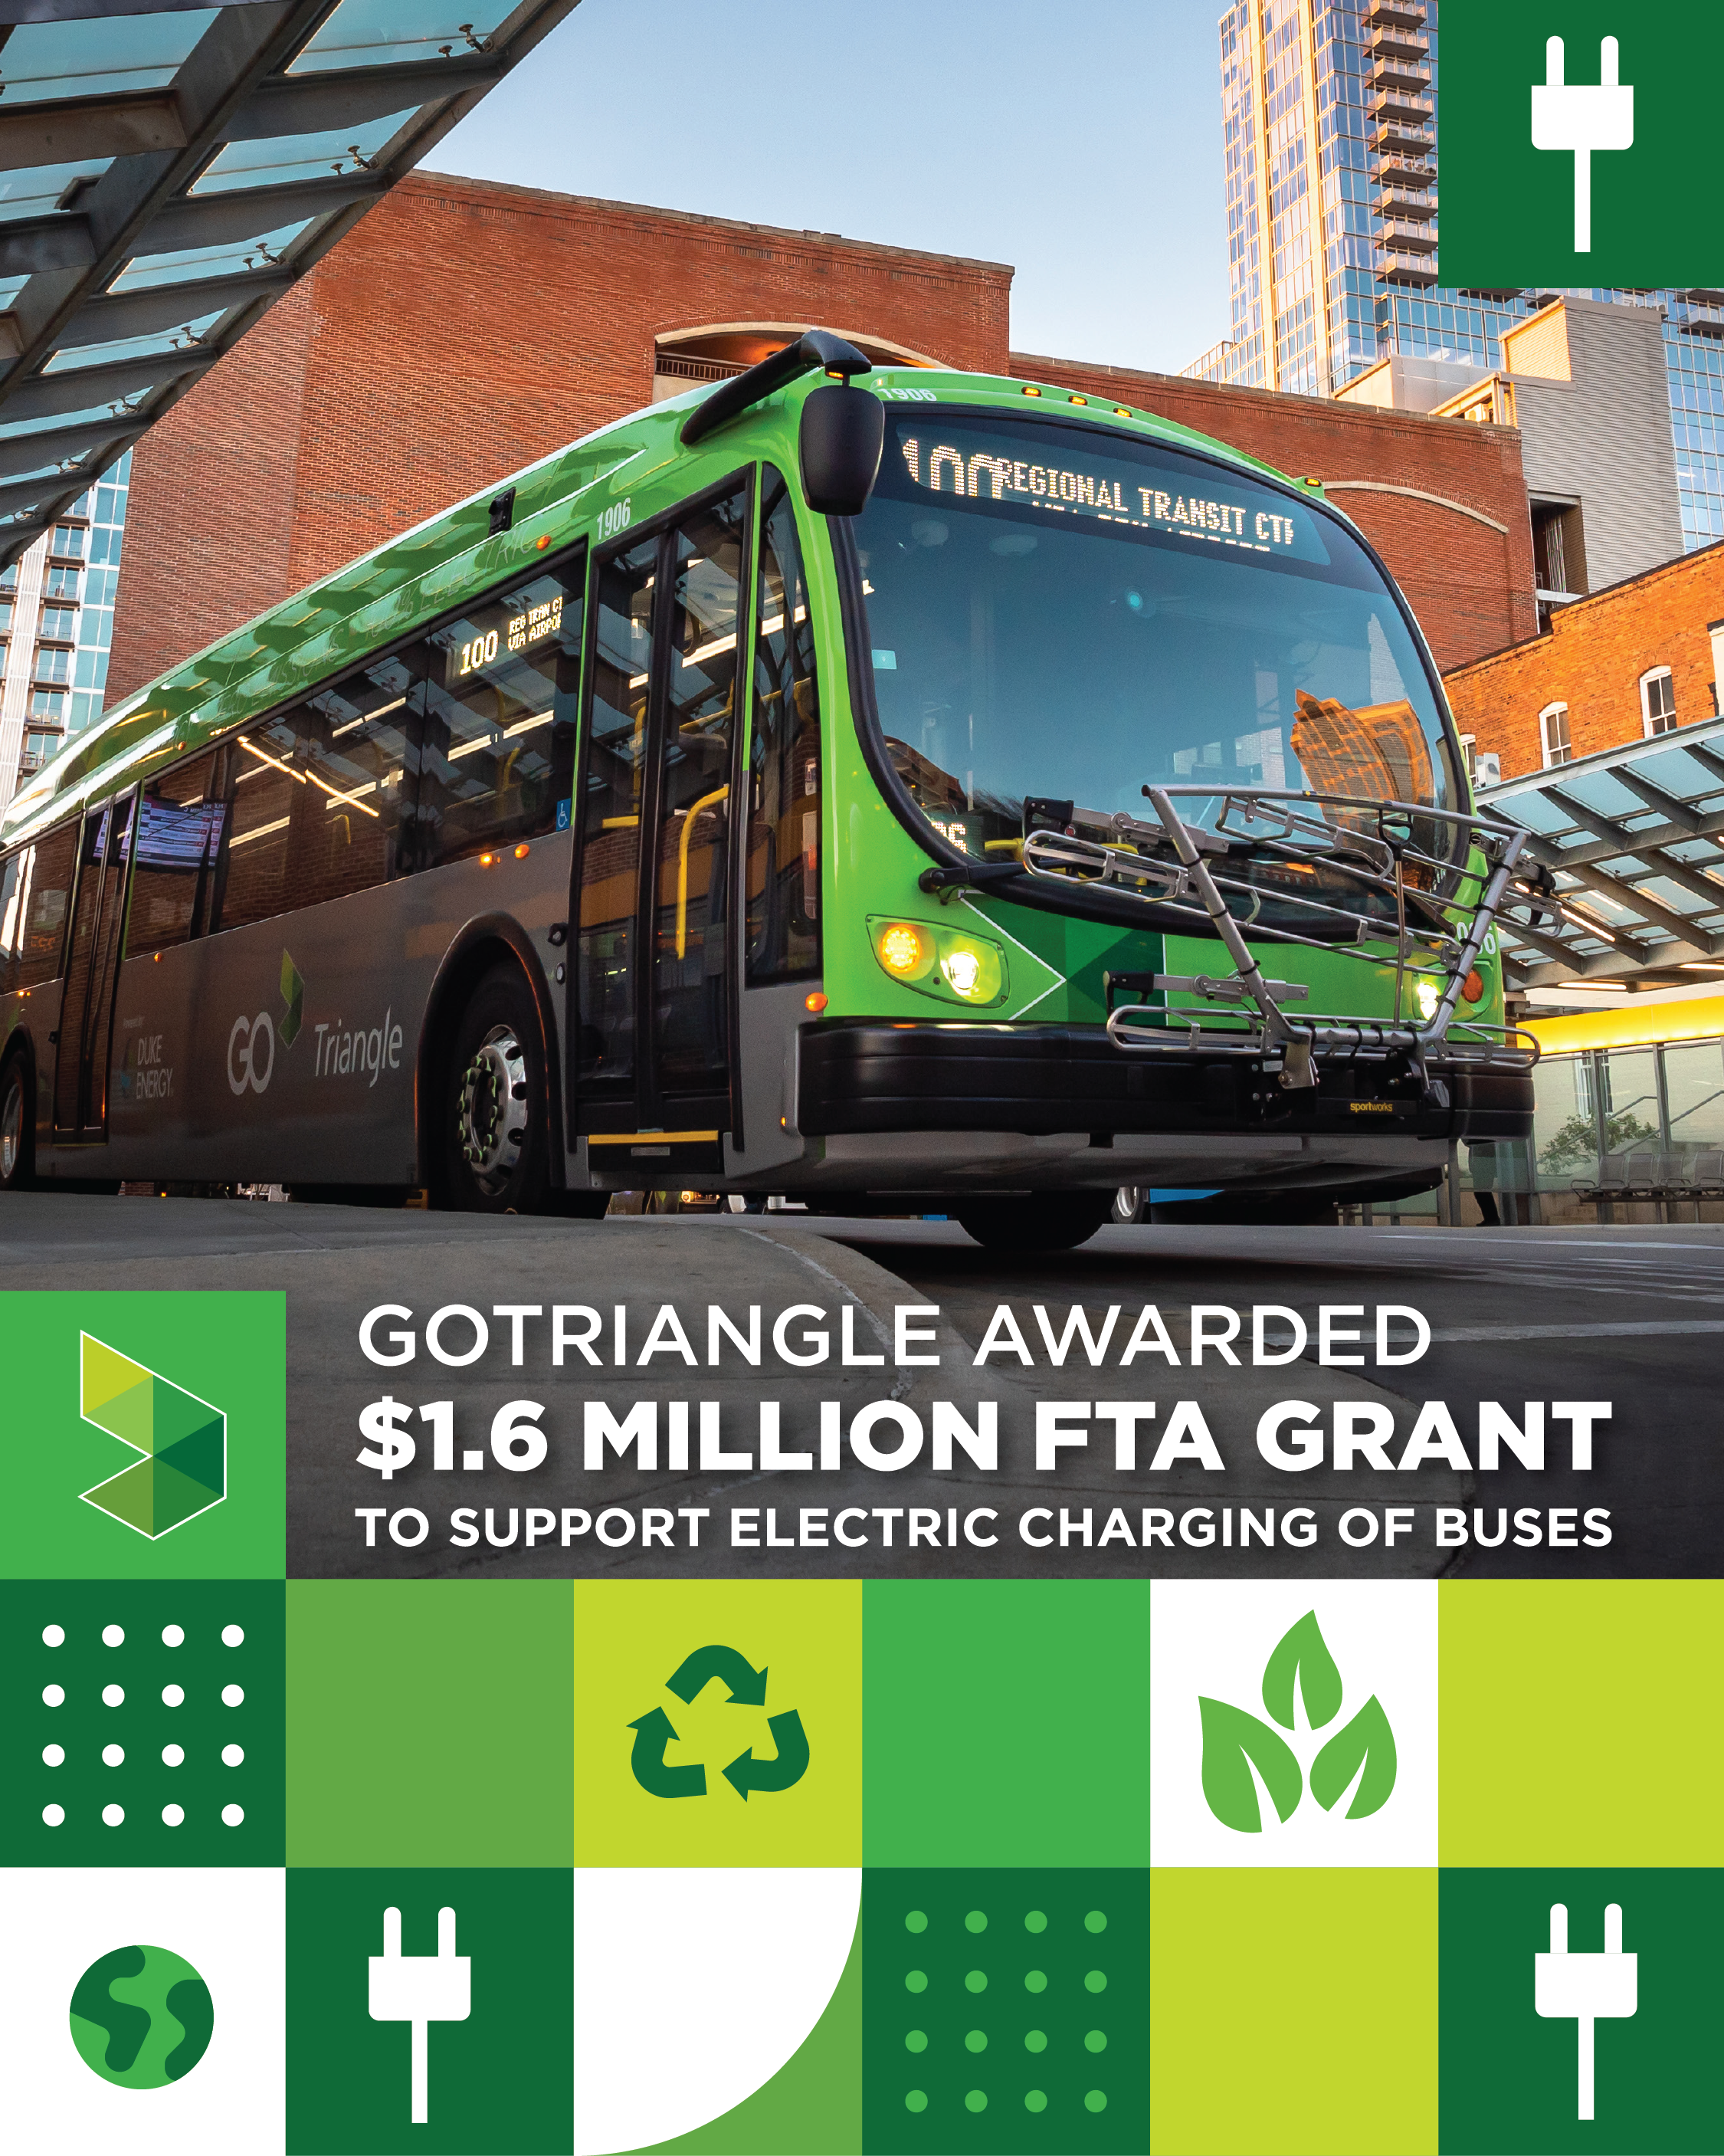 GoTriangle awarded $1.6 million FTA grant to support electric charging of buses